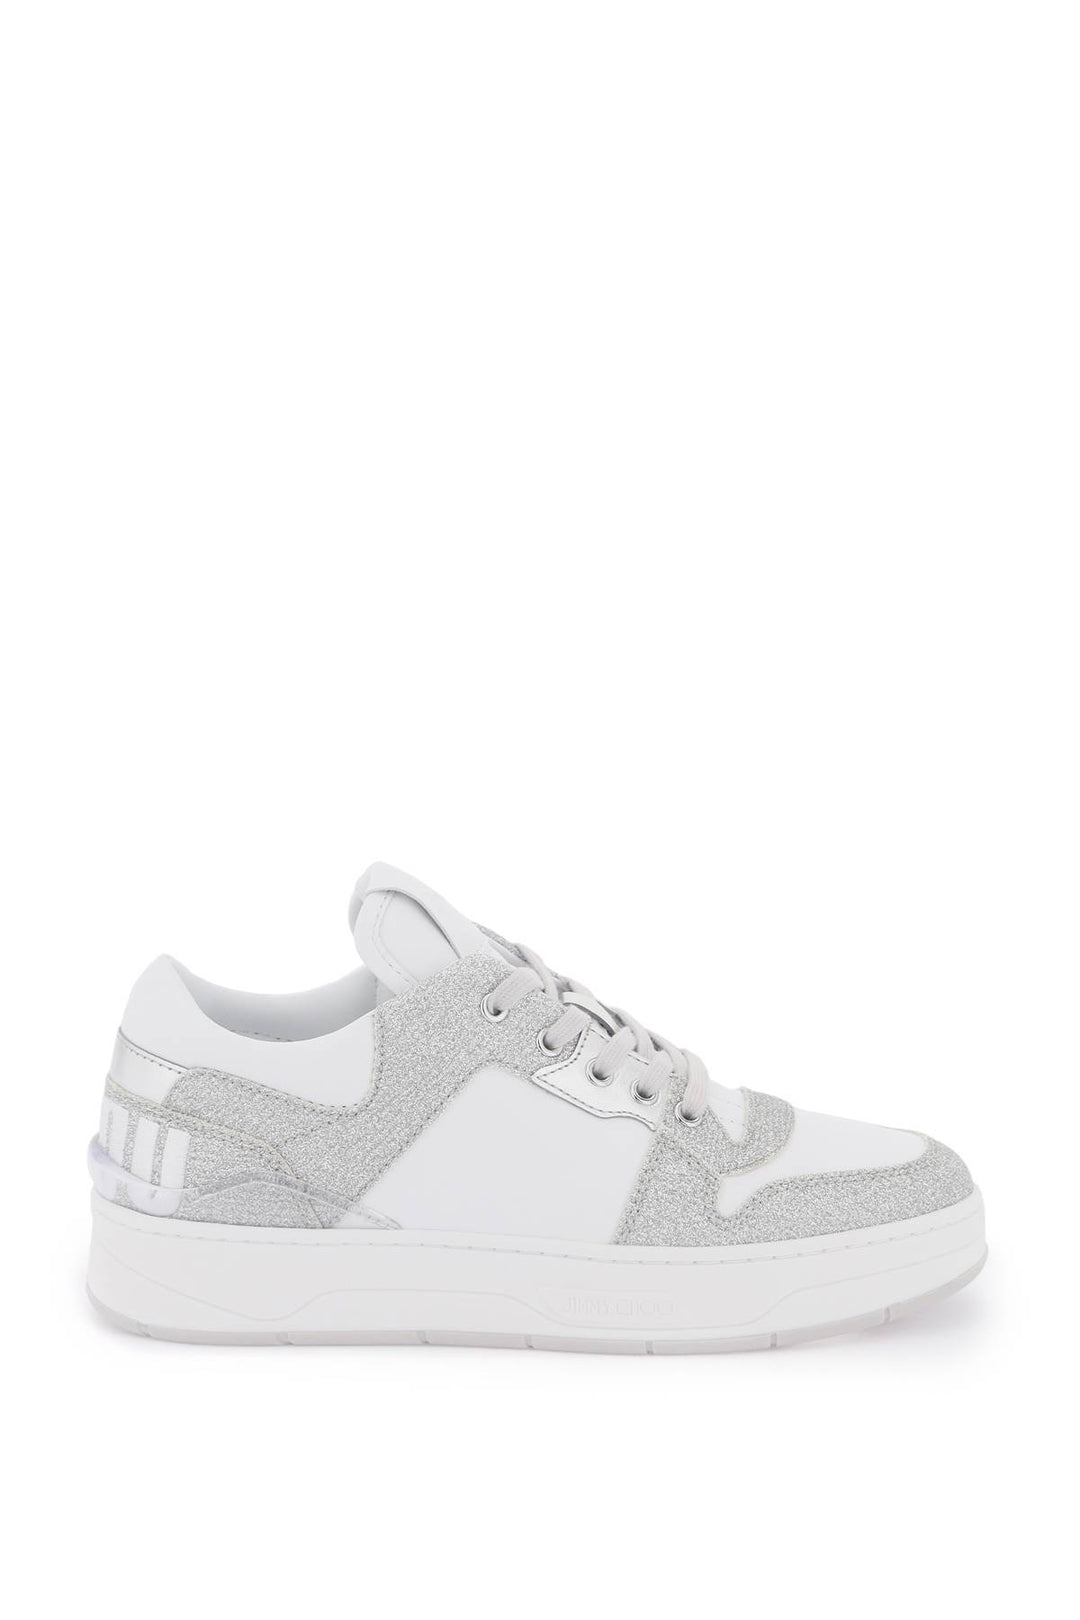 Jimmy Choo 'Florent' Glittered Sneakers With Lettering Logo   White